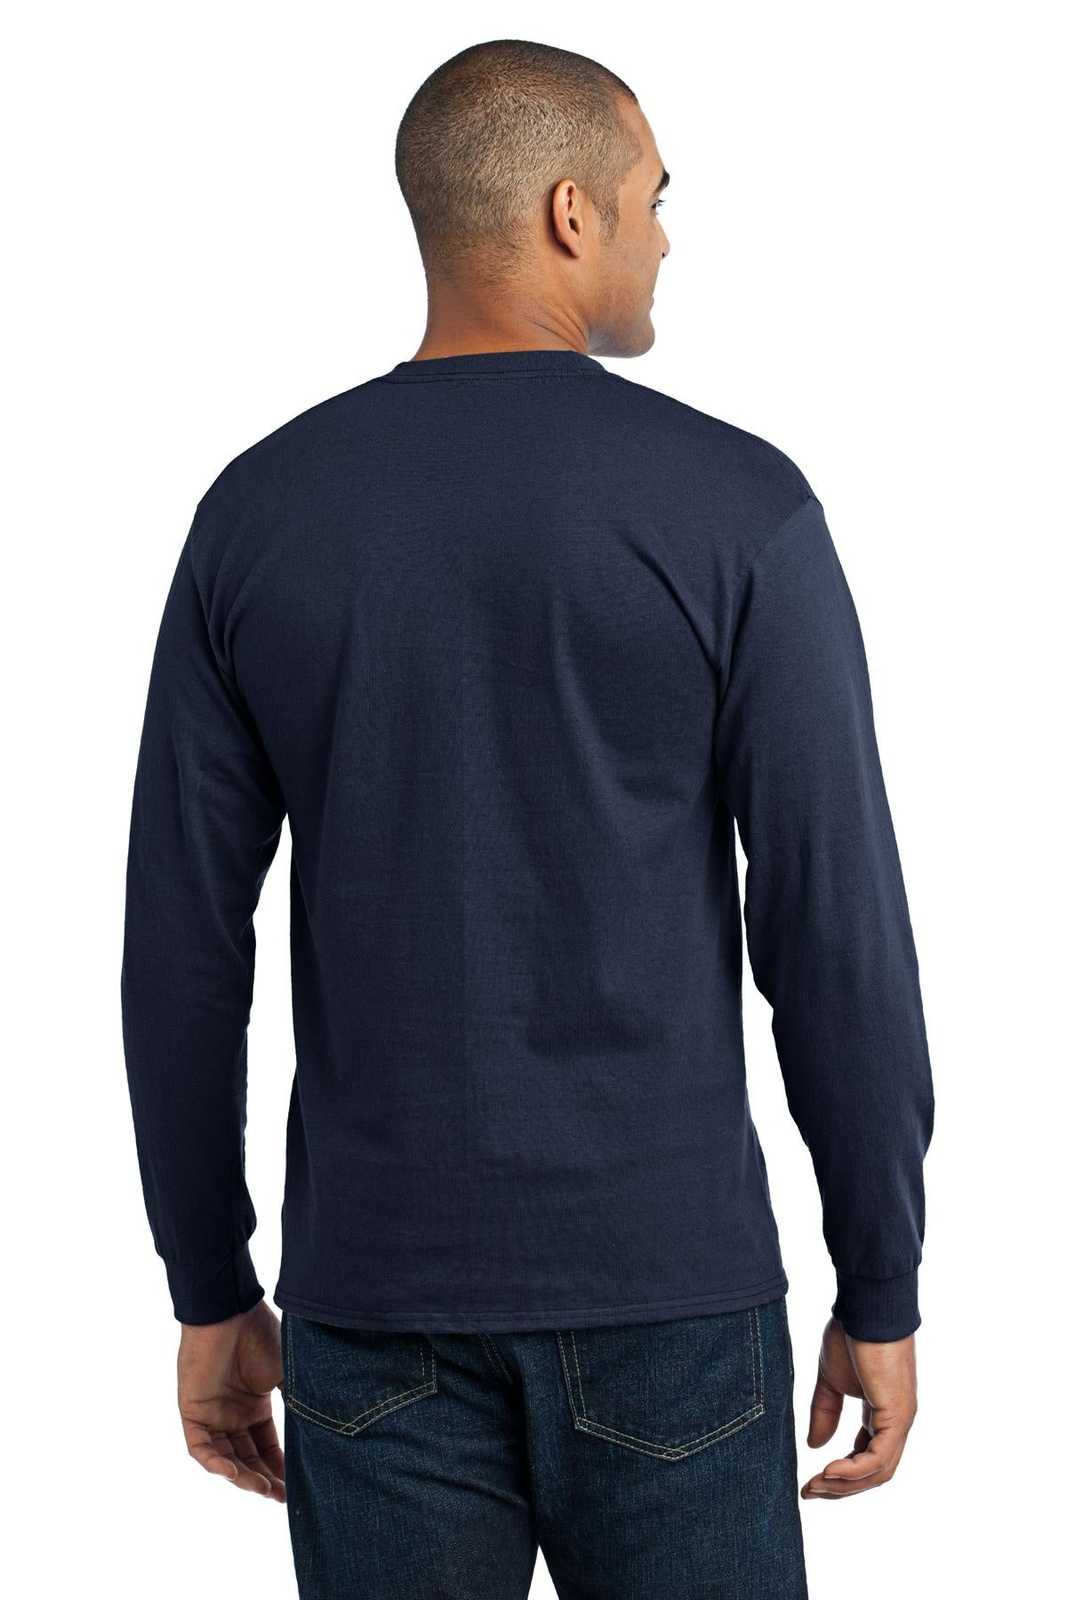 Port & Company PC55LS Long Sleeve Core Blend Tee - Navy - HIT a Double - 1